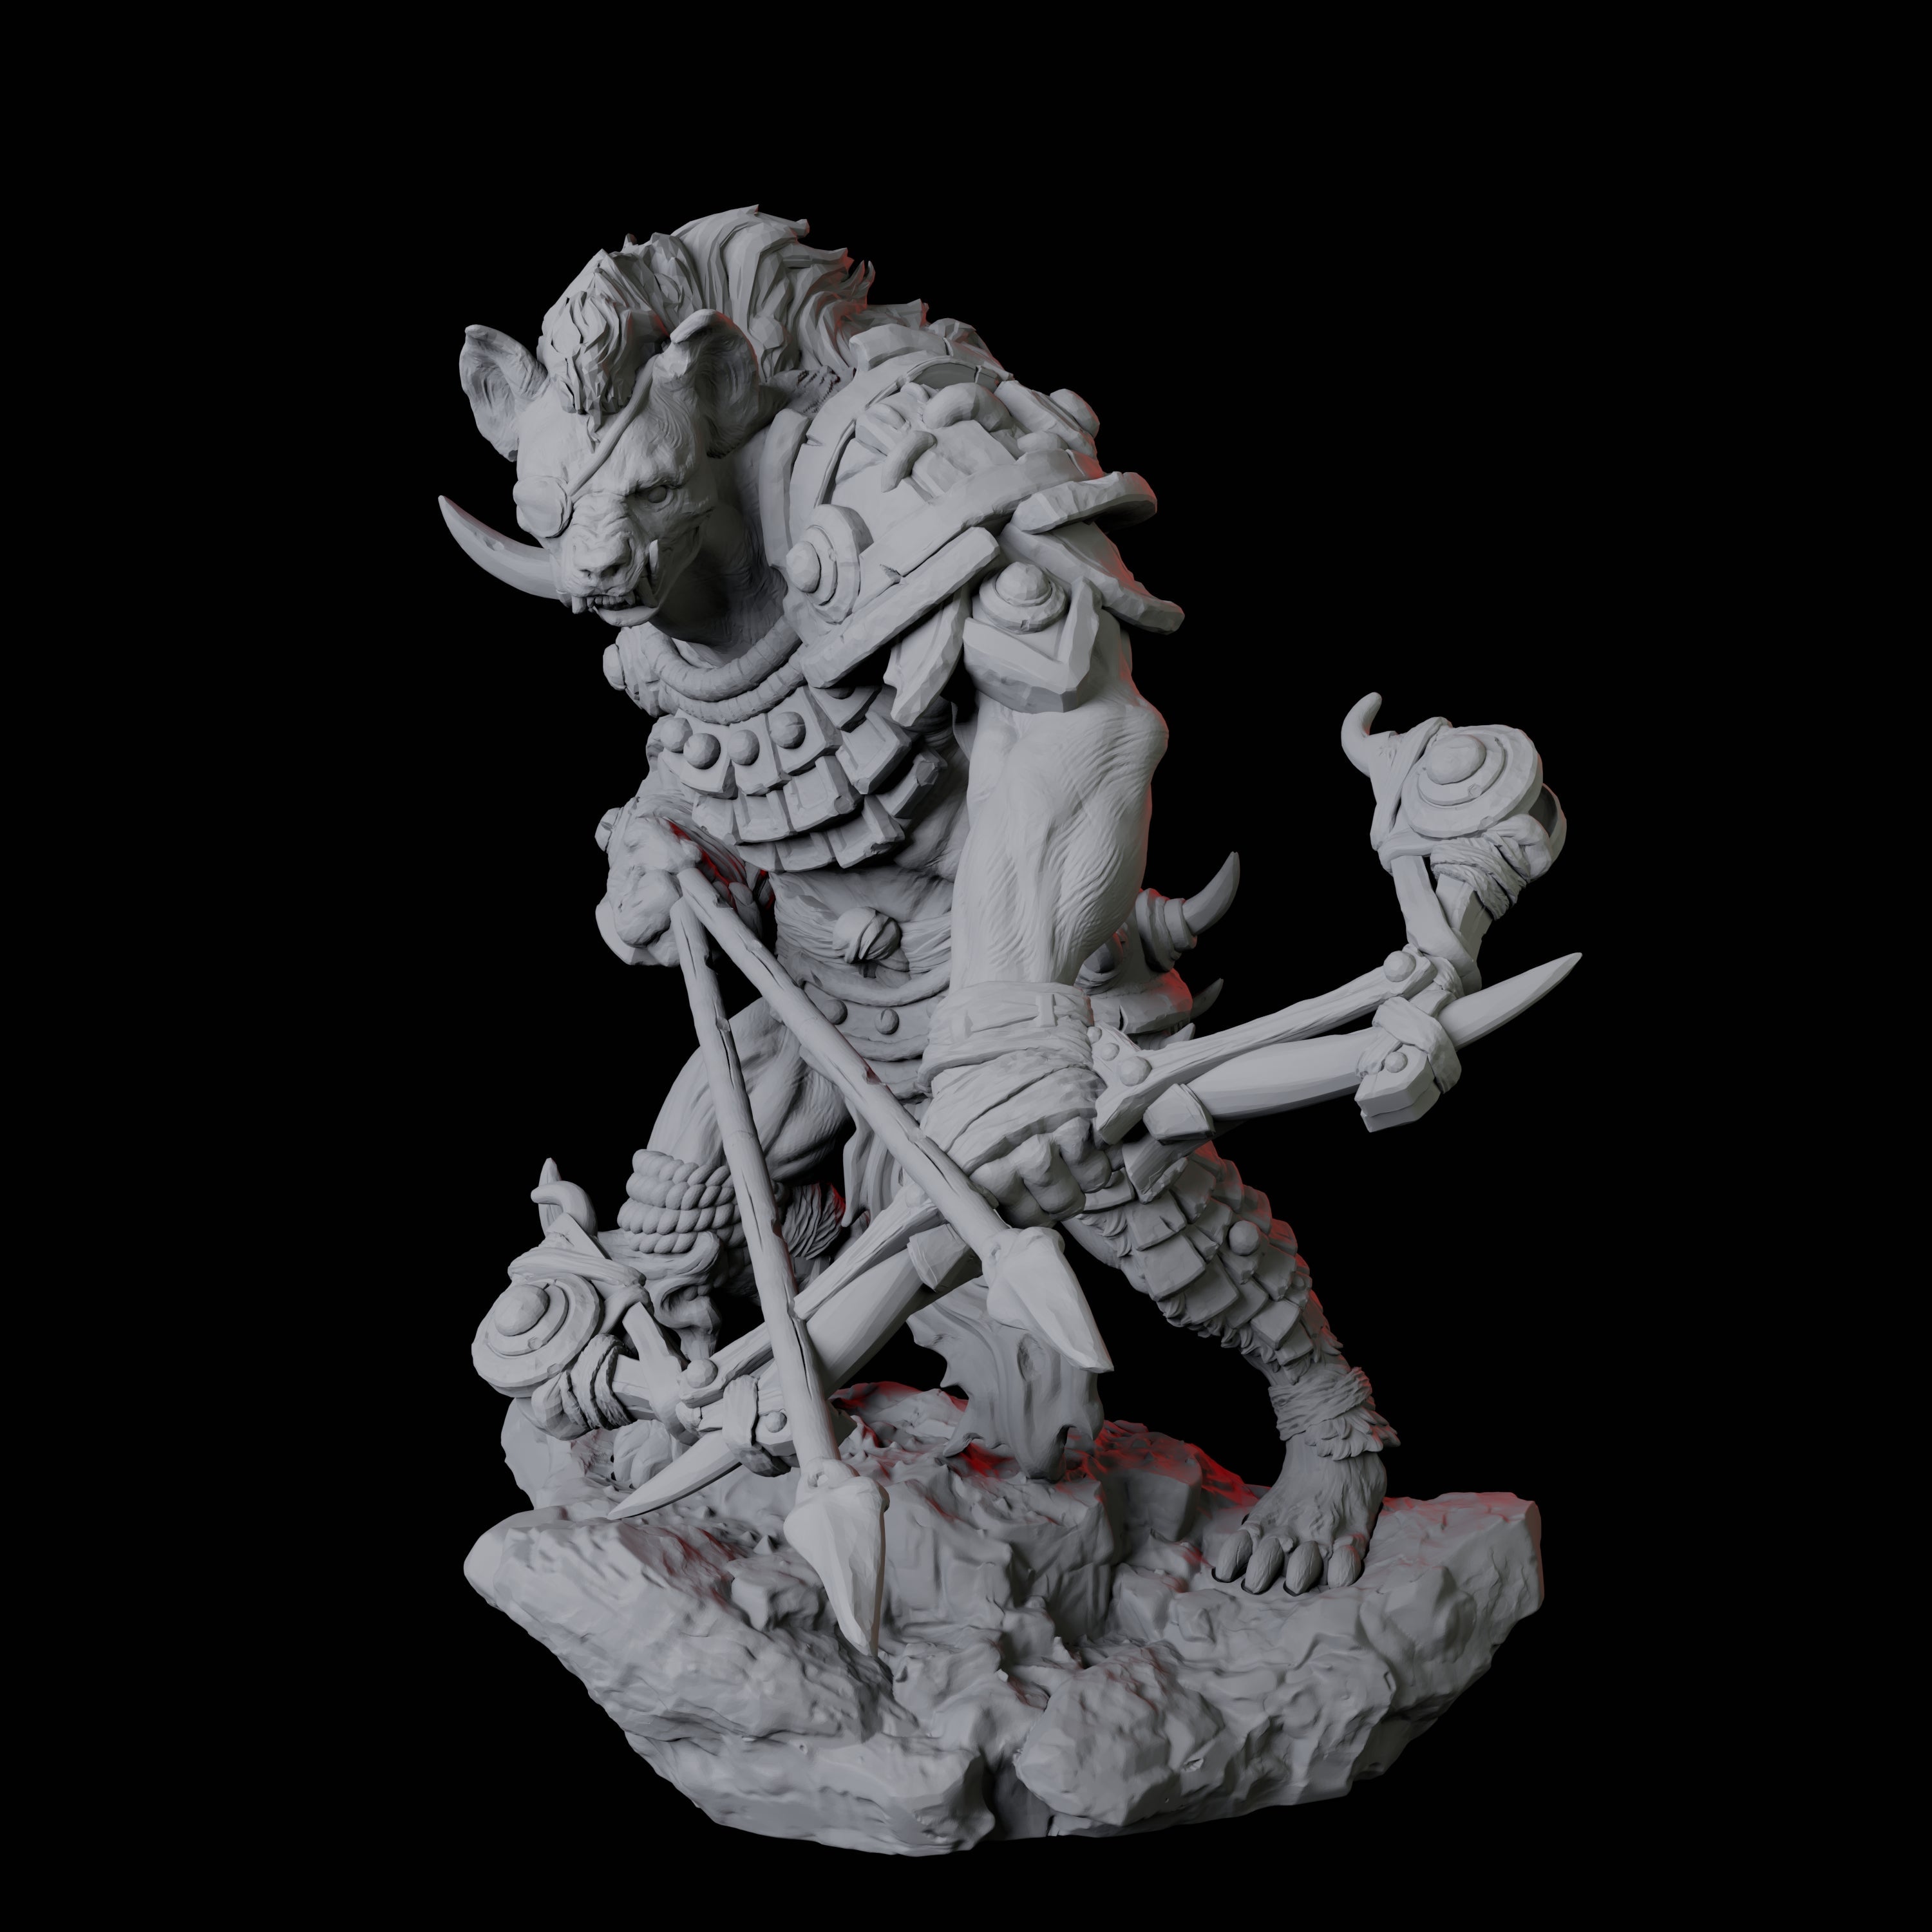 Four Gnoll Scouts Miniature for Dungeons and Dragons, Pathfinder or other TTRPGs